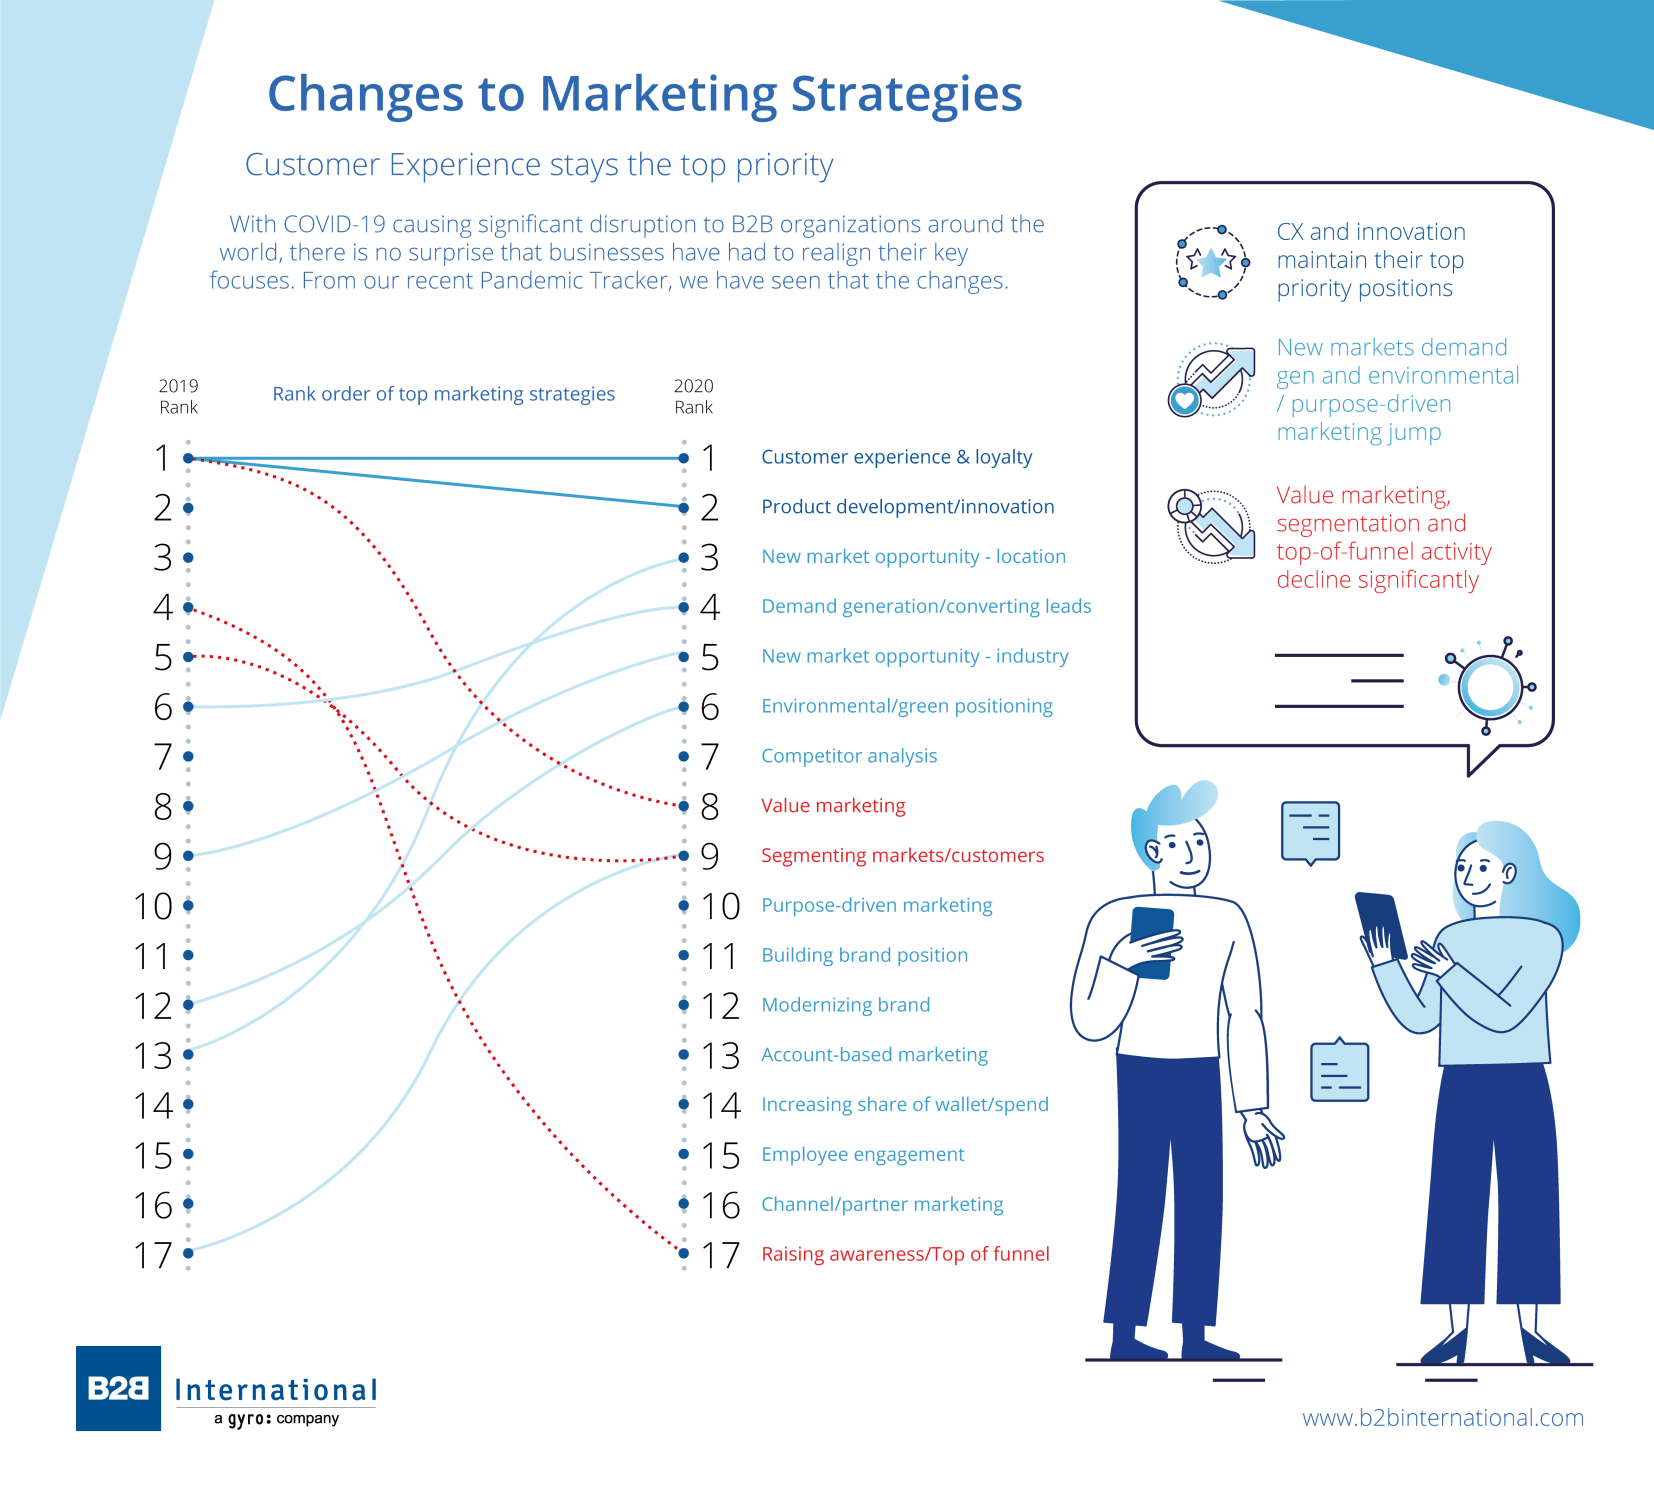 Post COVID-19 Changes to Marketing Strategies